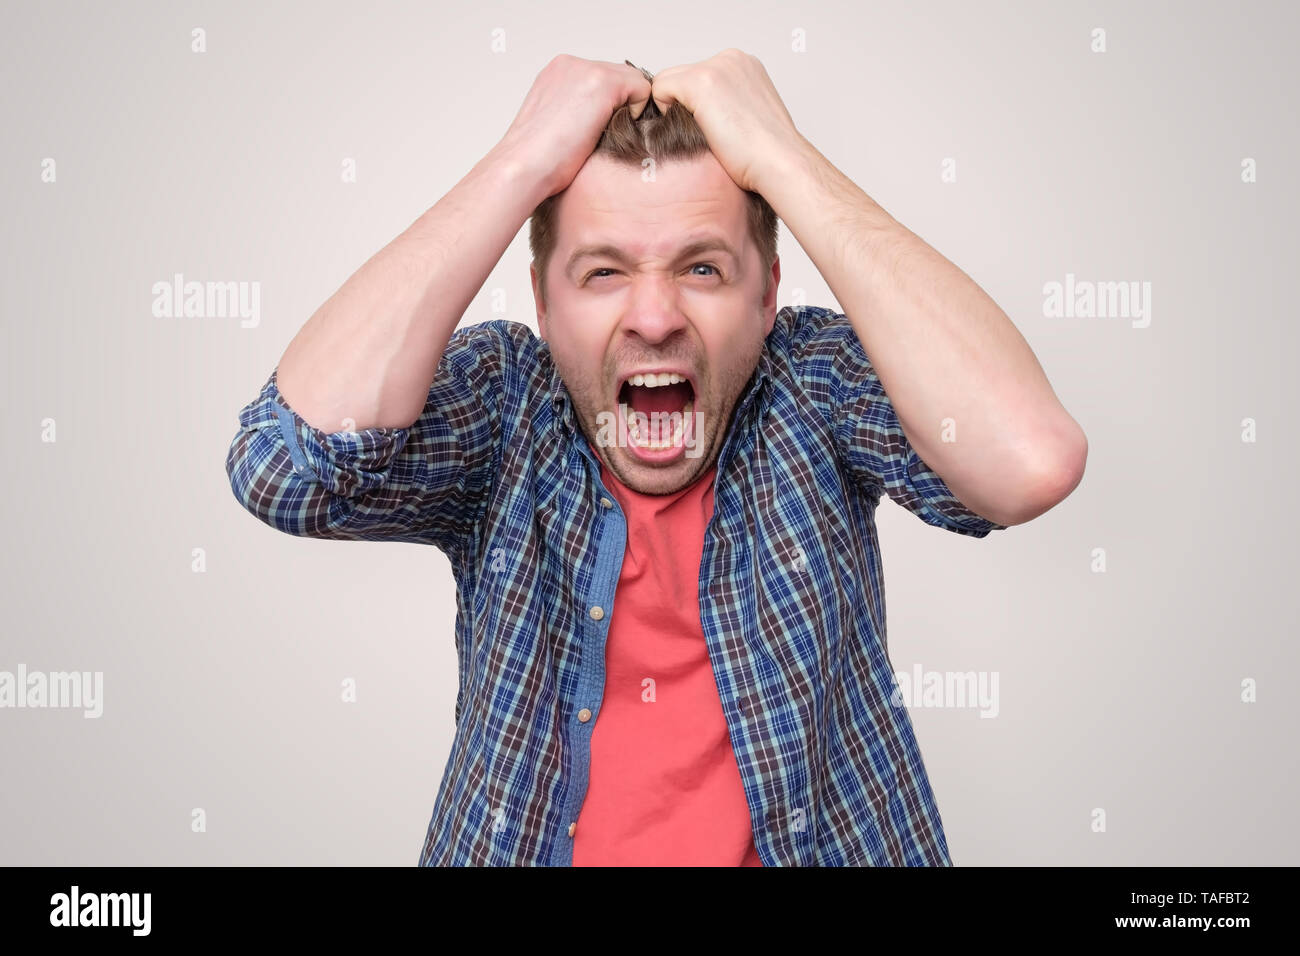 Furious, enraged man with mouth opened in shout Stock Photo